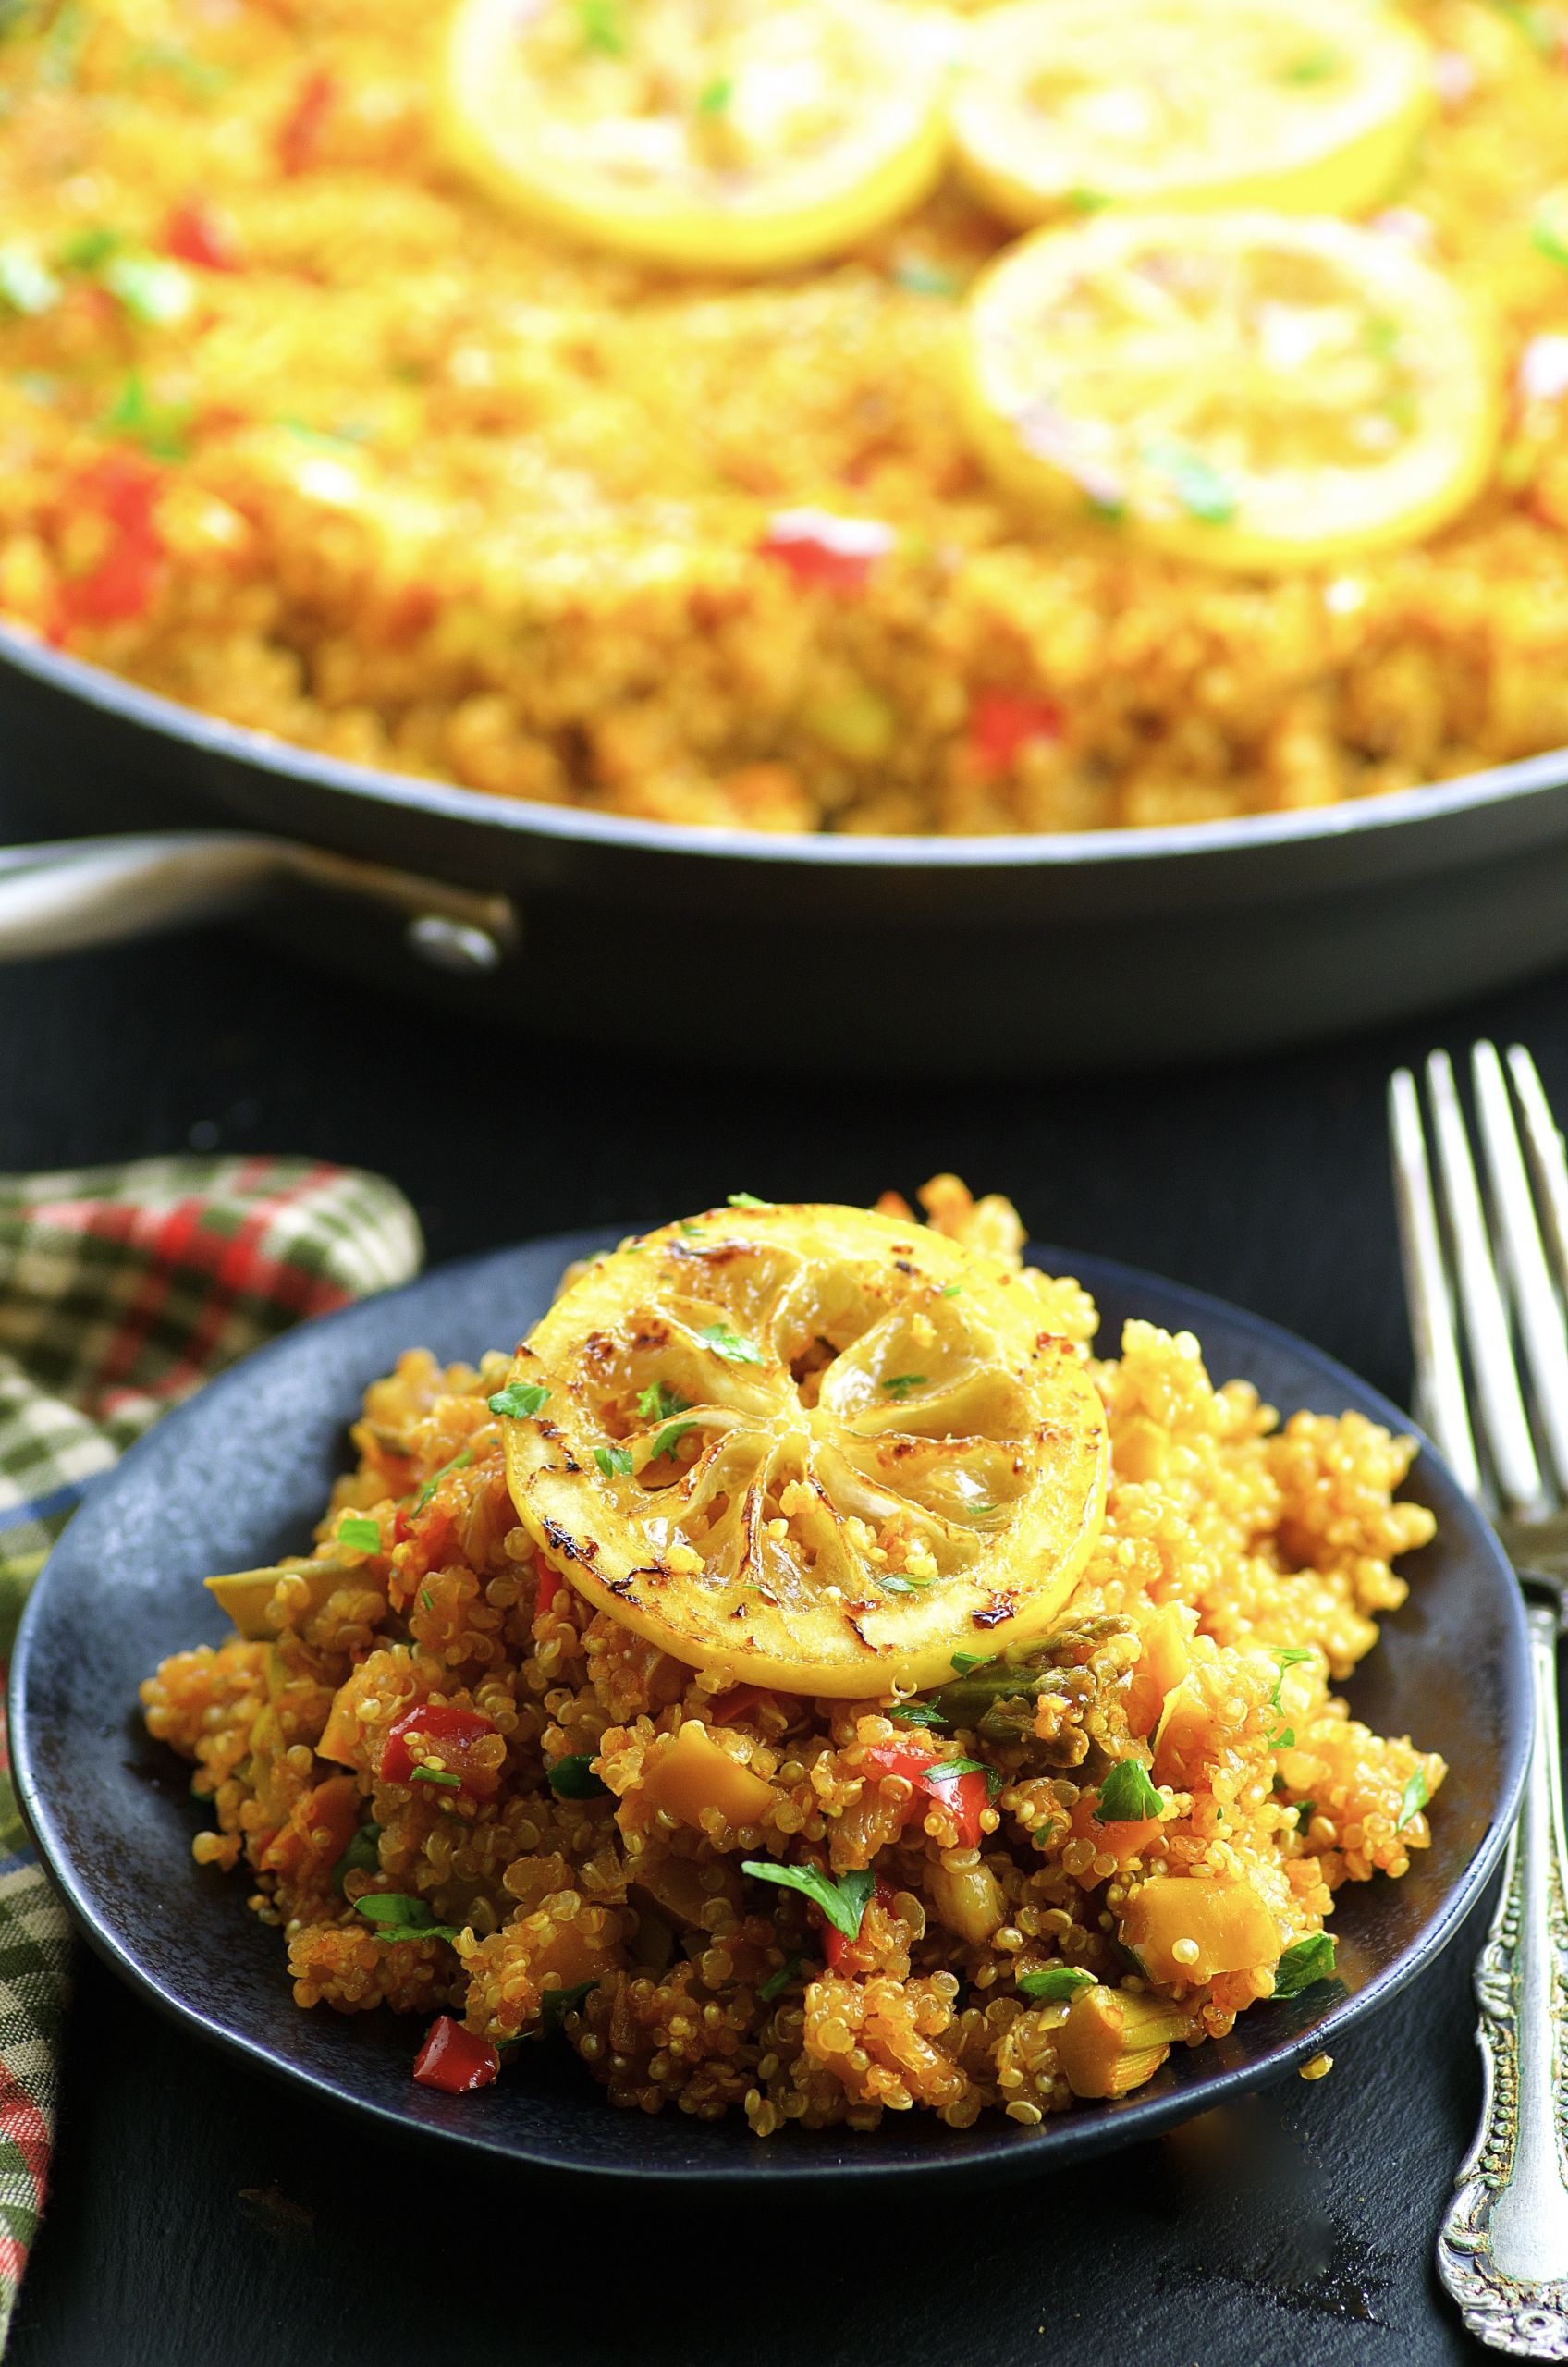 Dairy Free soy Free Recipes Best Of Vegan Gluten Free Quinoa Paella May I Have that Recipe